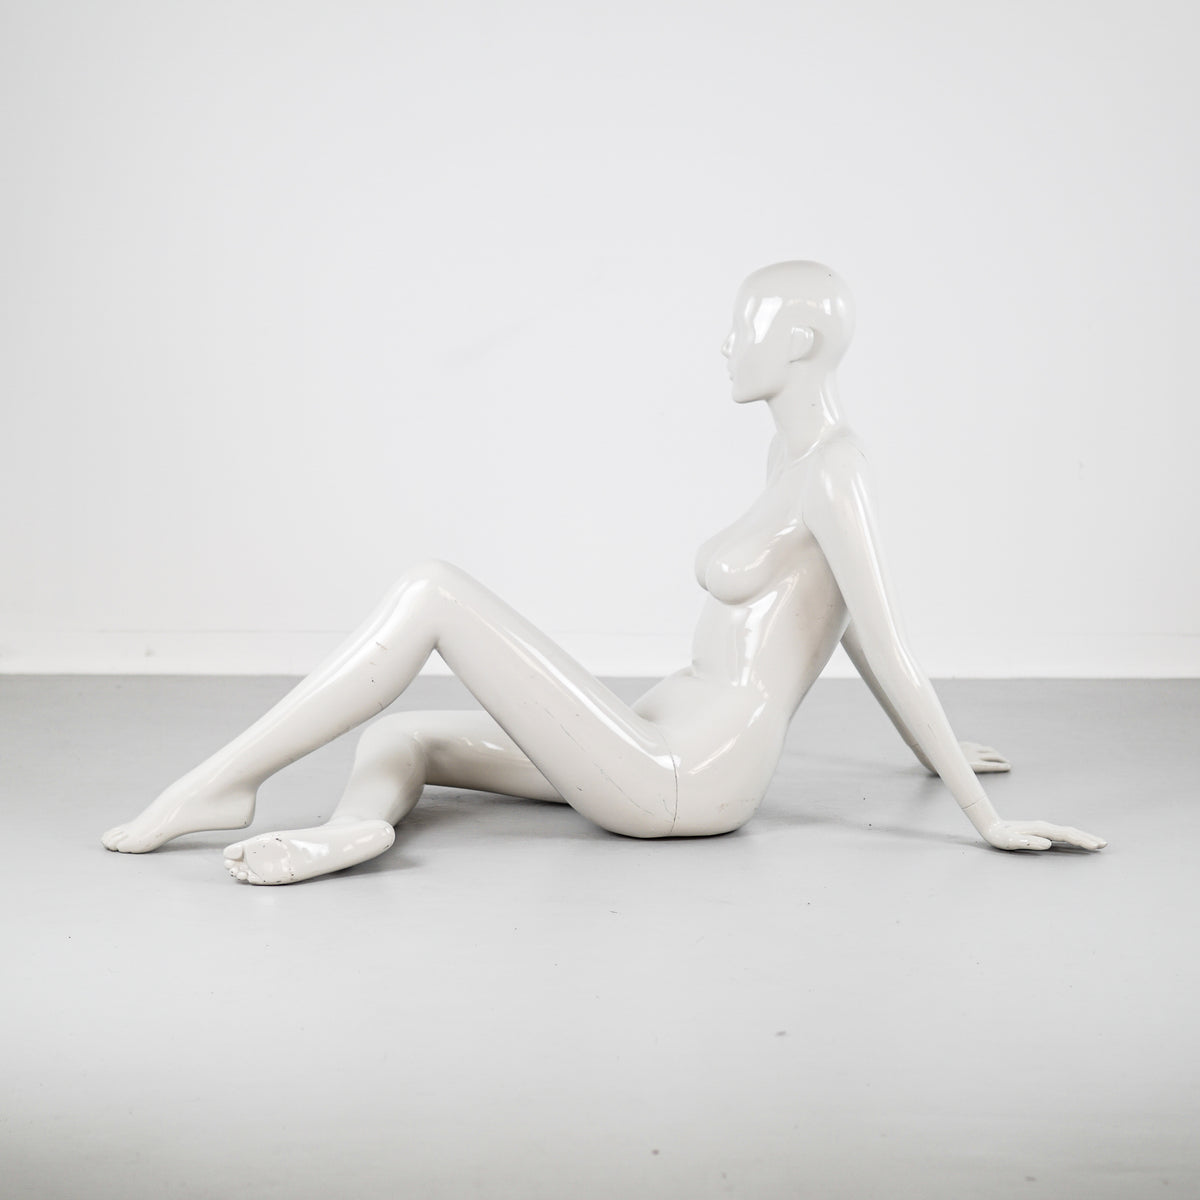 Poliester White Sitting Mannequin